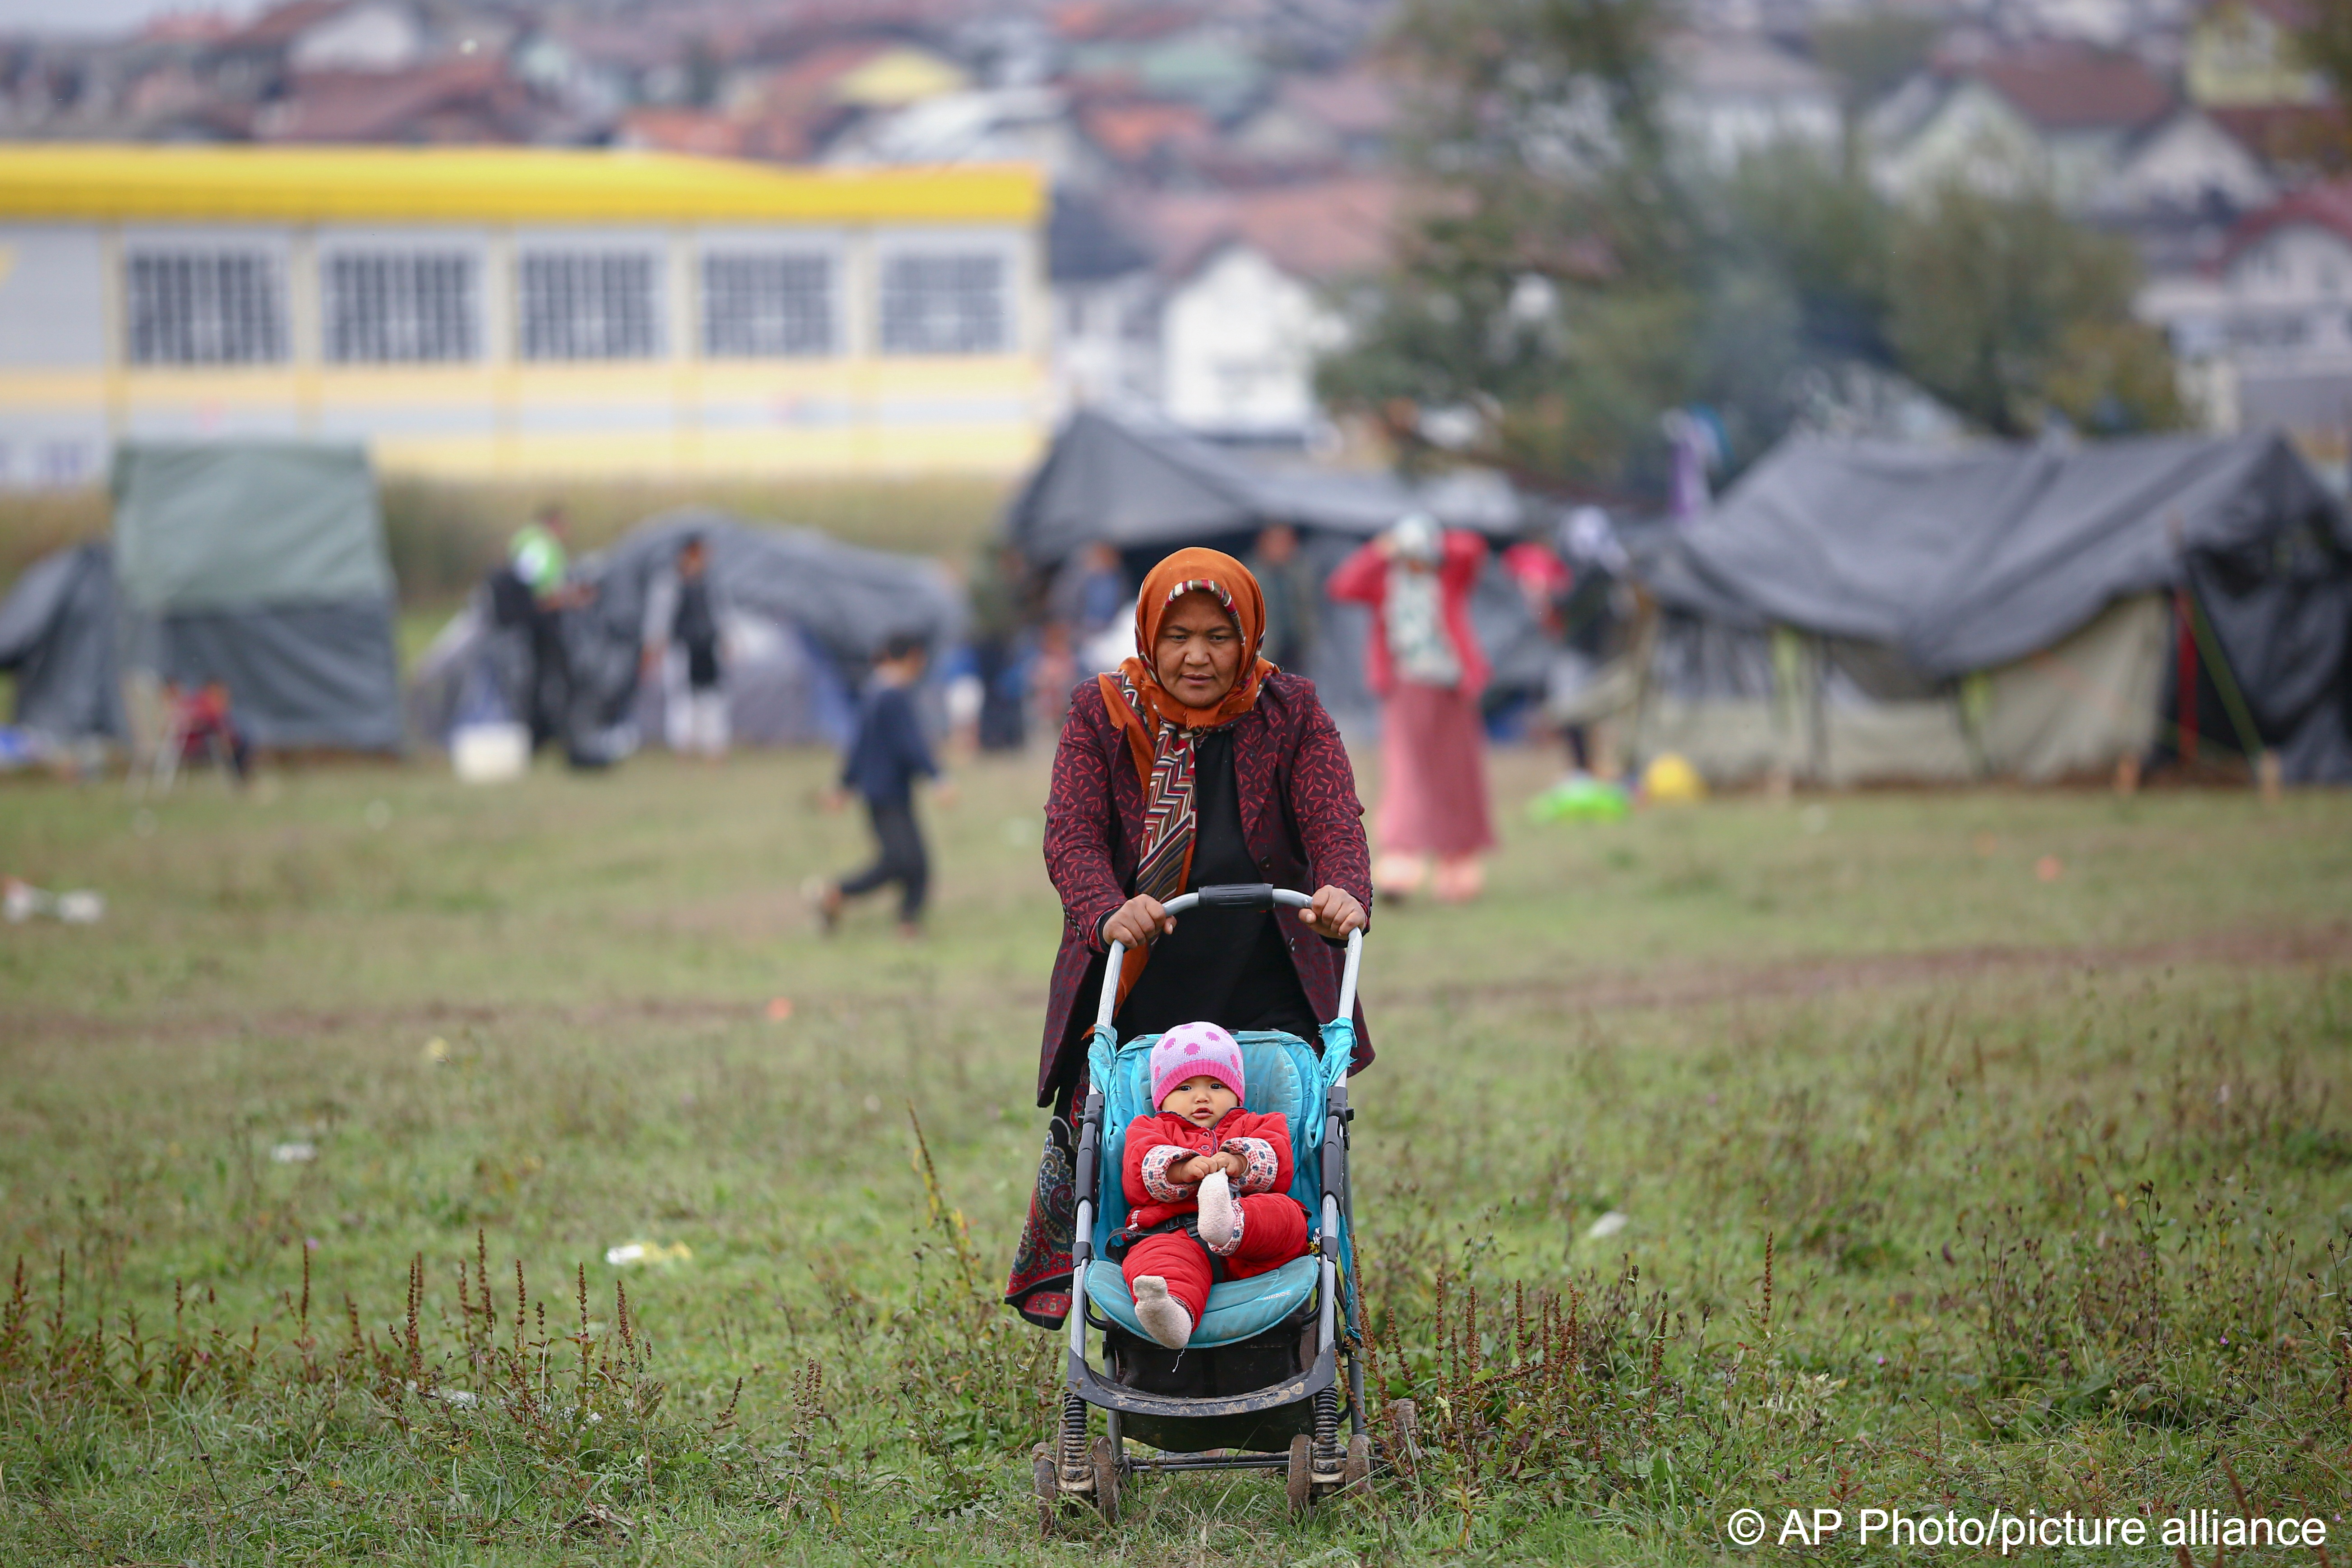 A migrant woman pushes a baby stroller at a makeshift camp housing migrants mostly from Afghanistan, in Velika Kladusa, Bosnia, 12 October 2021 (photo: AP Photo)